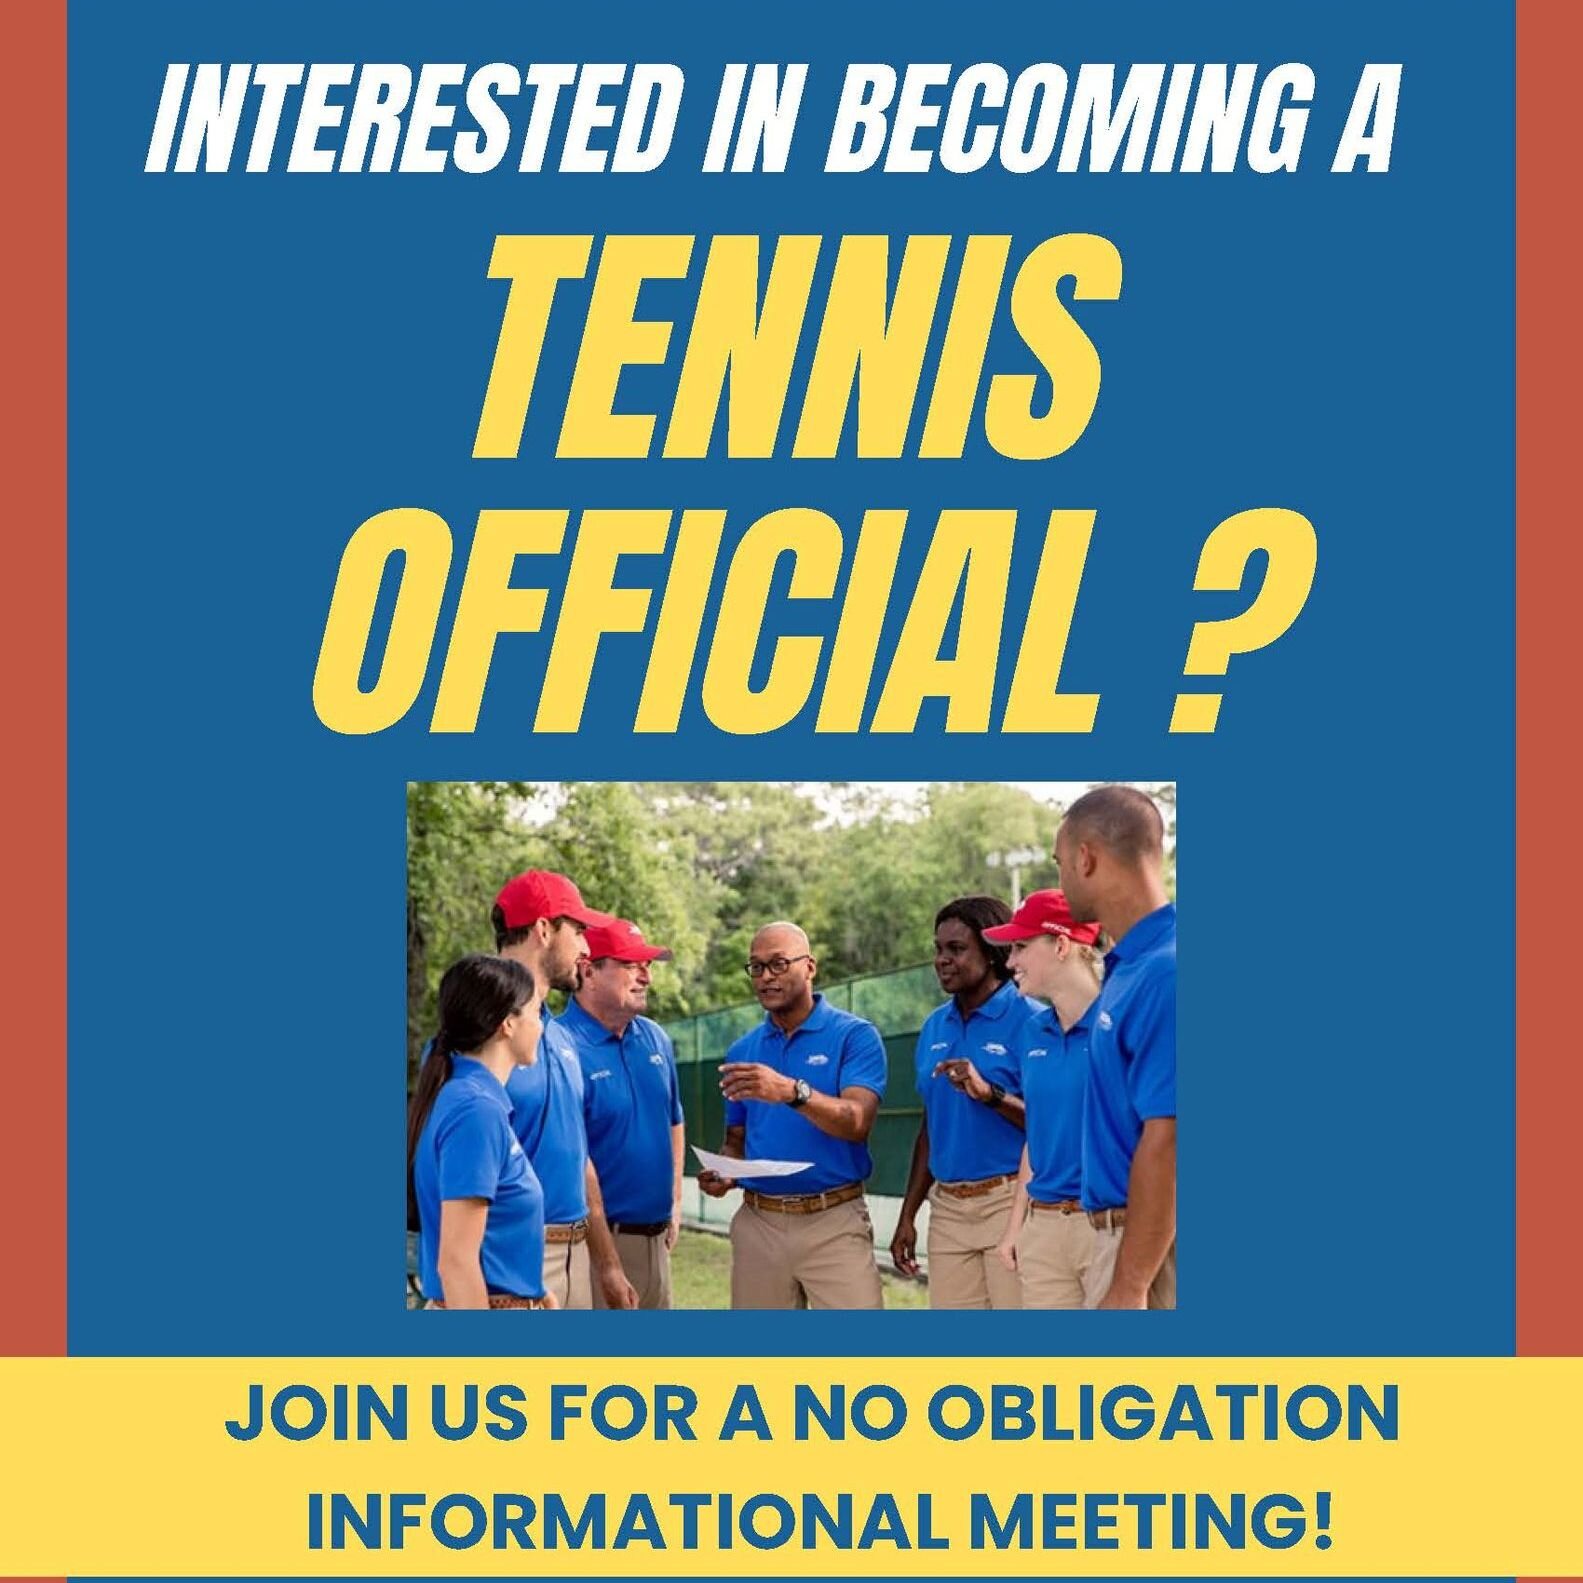 Interested in becoming a tennis official? Join us for a no obligation info meeting May 20 4-5p Aston Park, register here: https://form.jotform.com/230814022670042